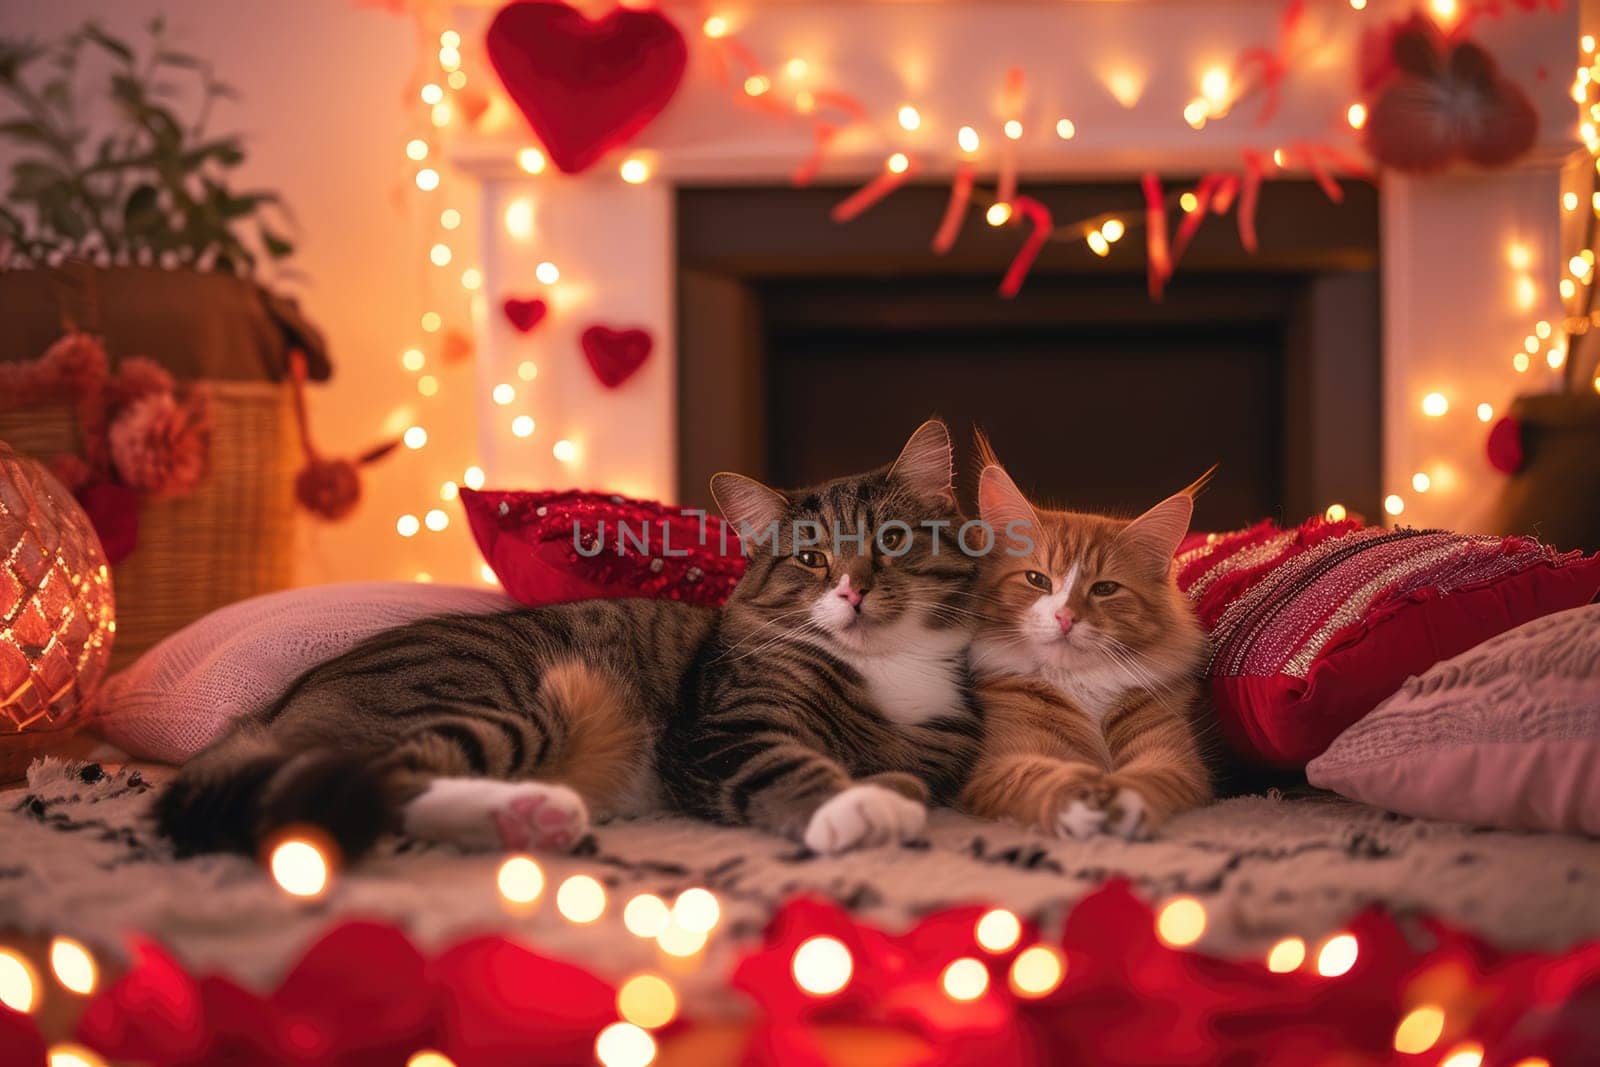 A couple of happy kittens cats together in a cozy room. pragma by biancoblue